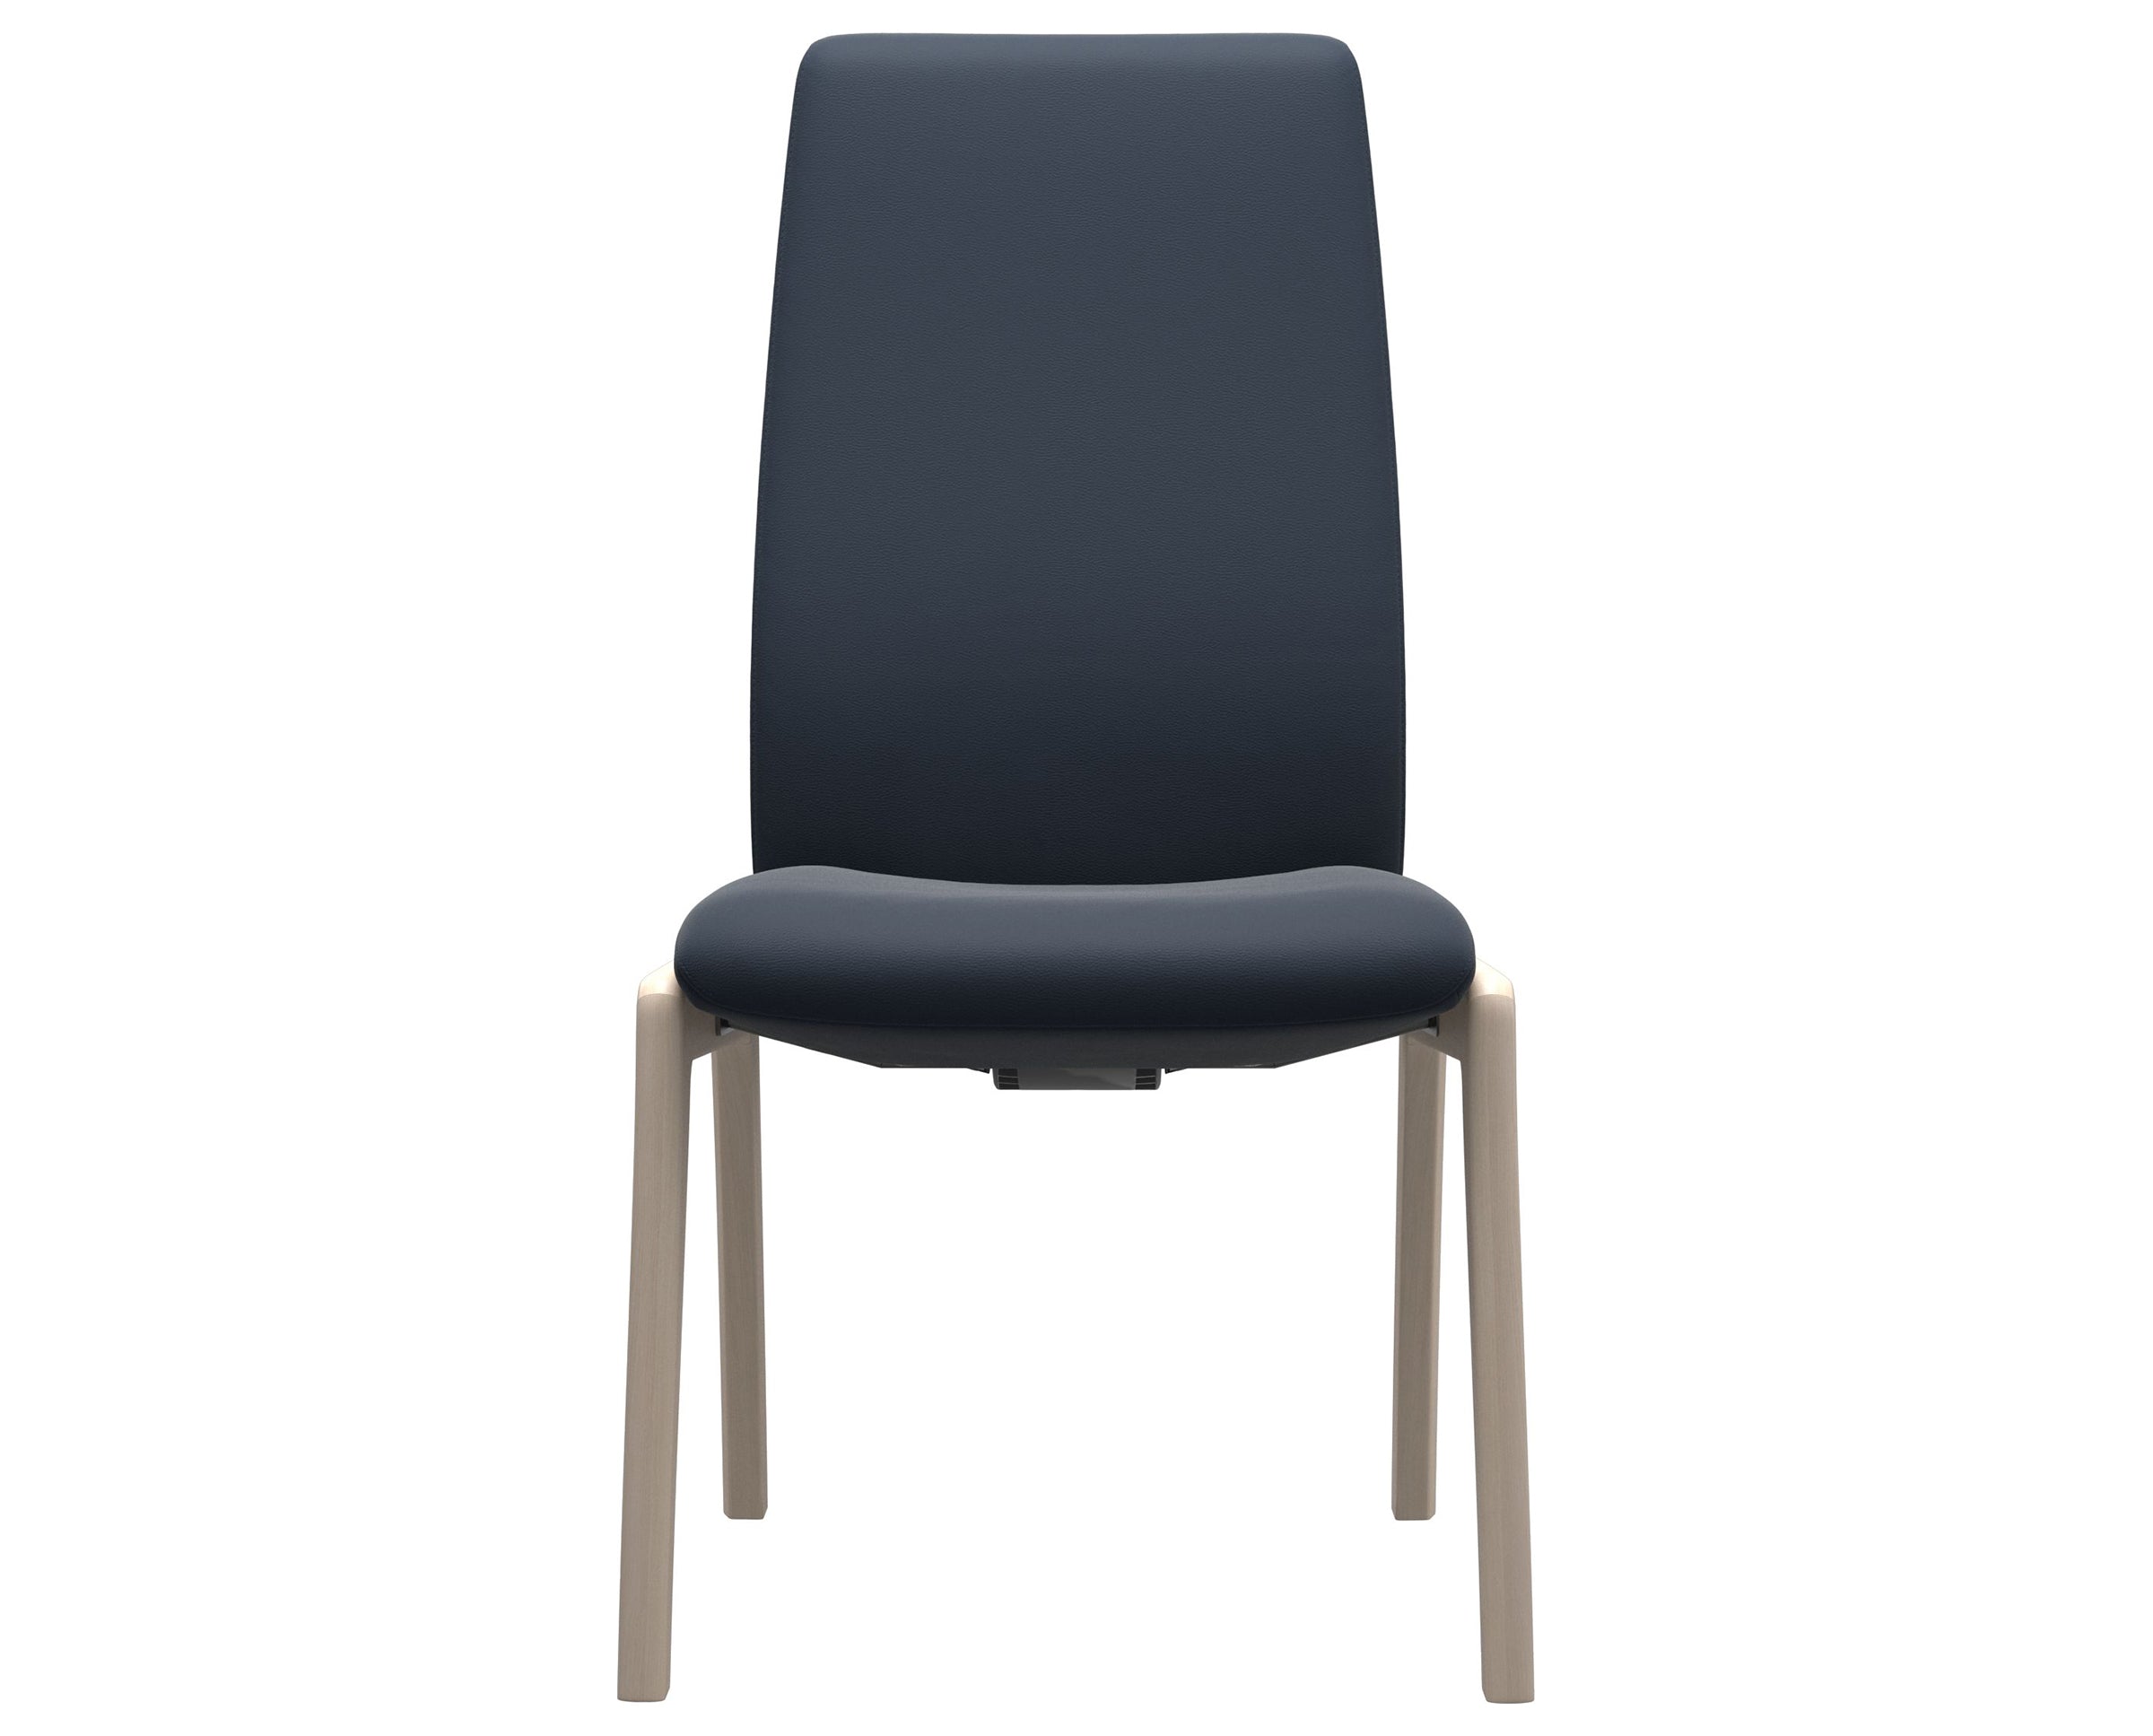 Paloma Leather Oxford Blue and Whitewash Base | Stressless Laurel High Back D100 Dining Chair | Valley Ridge Furniture